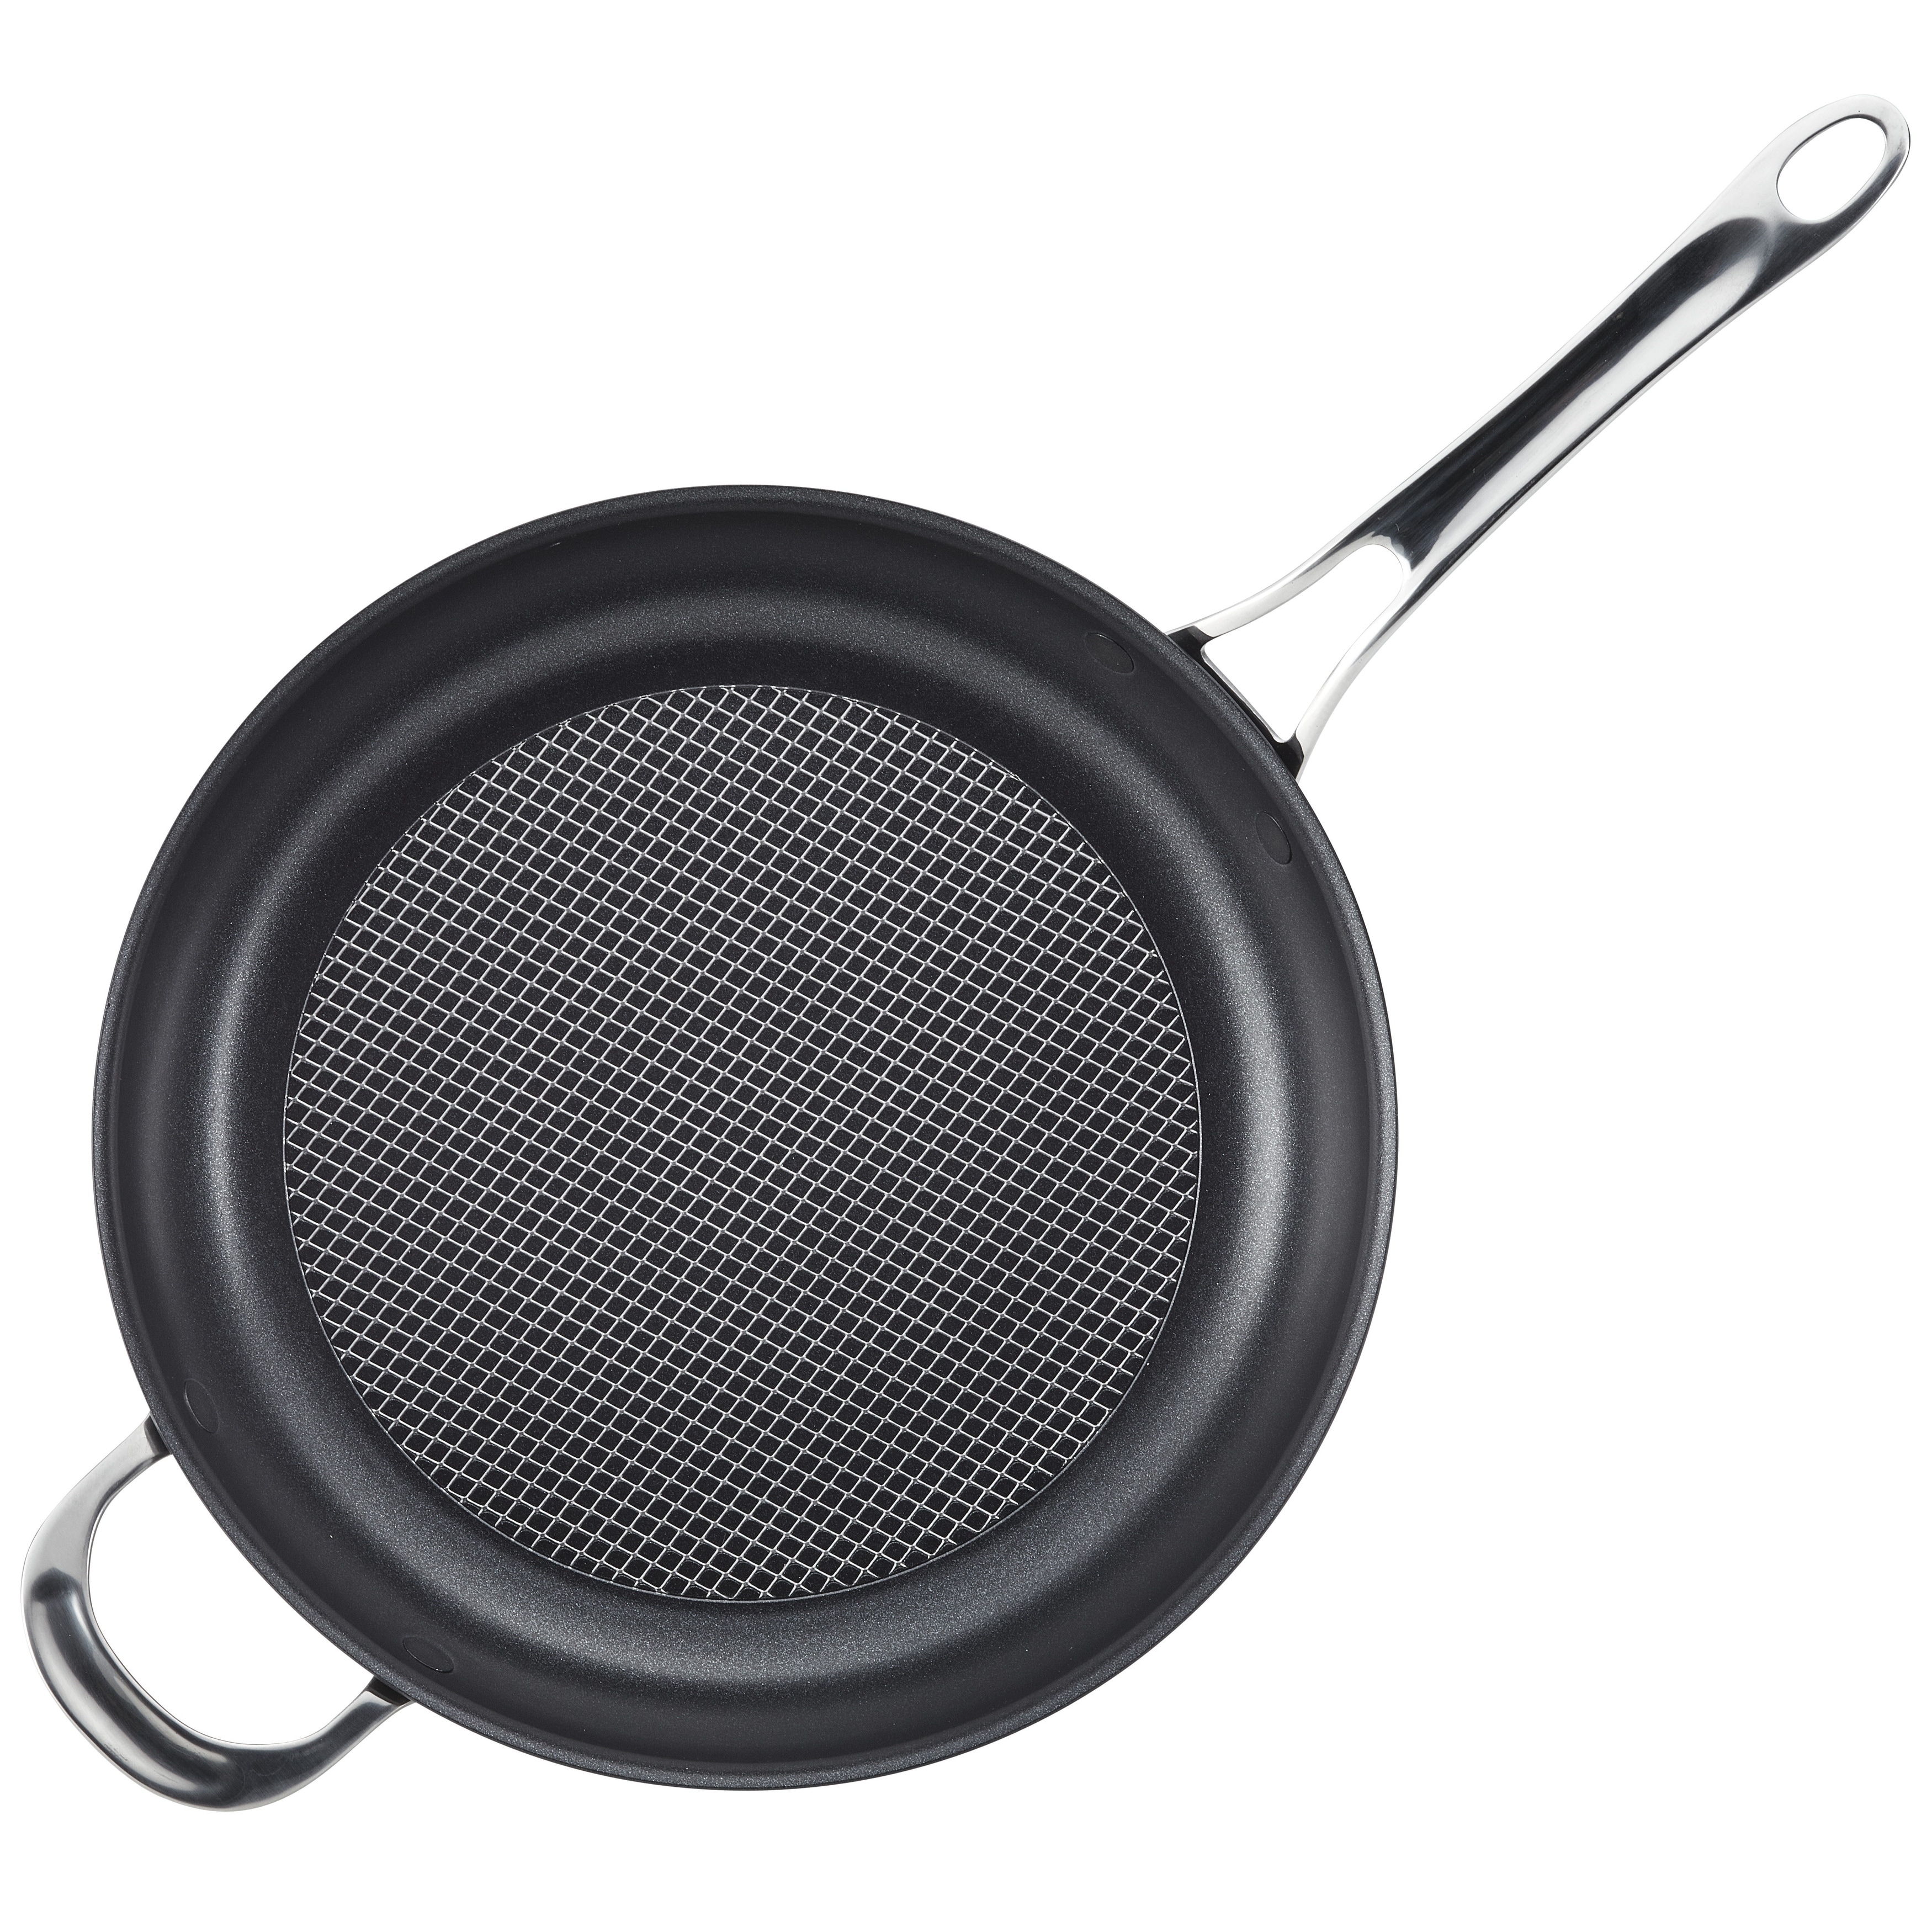 17003101 Extra Large Non-Stick Pan - Unperforated